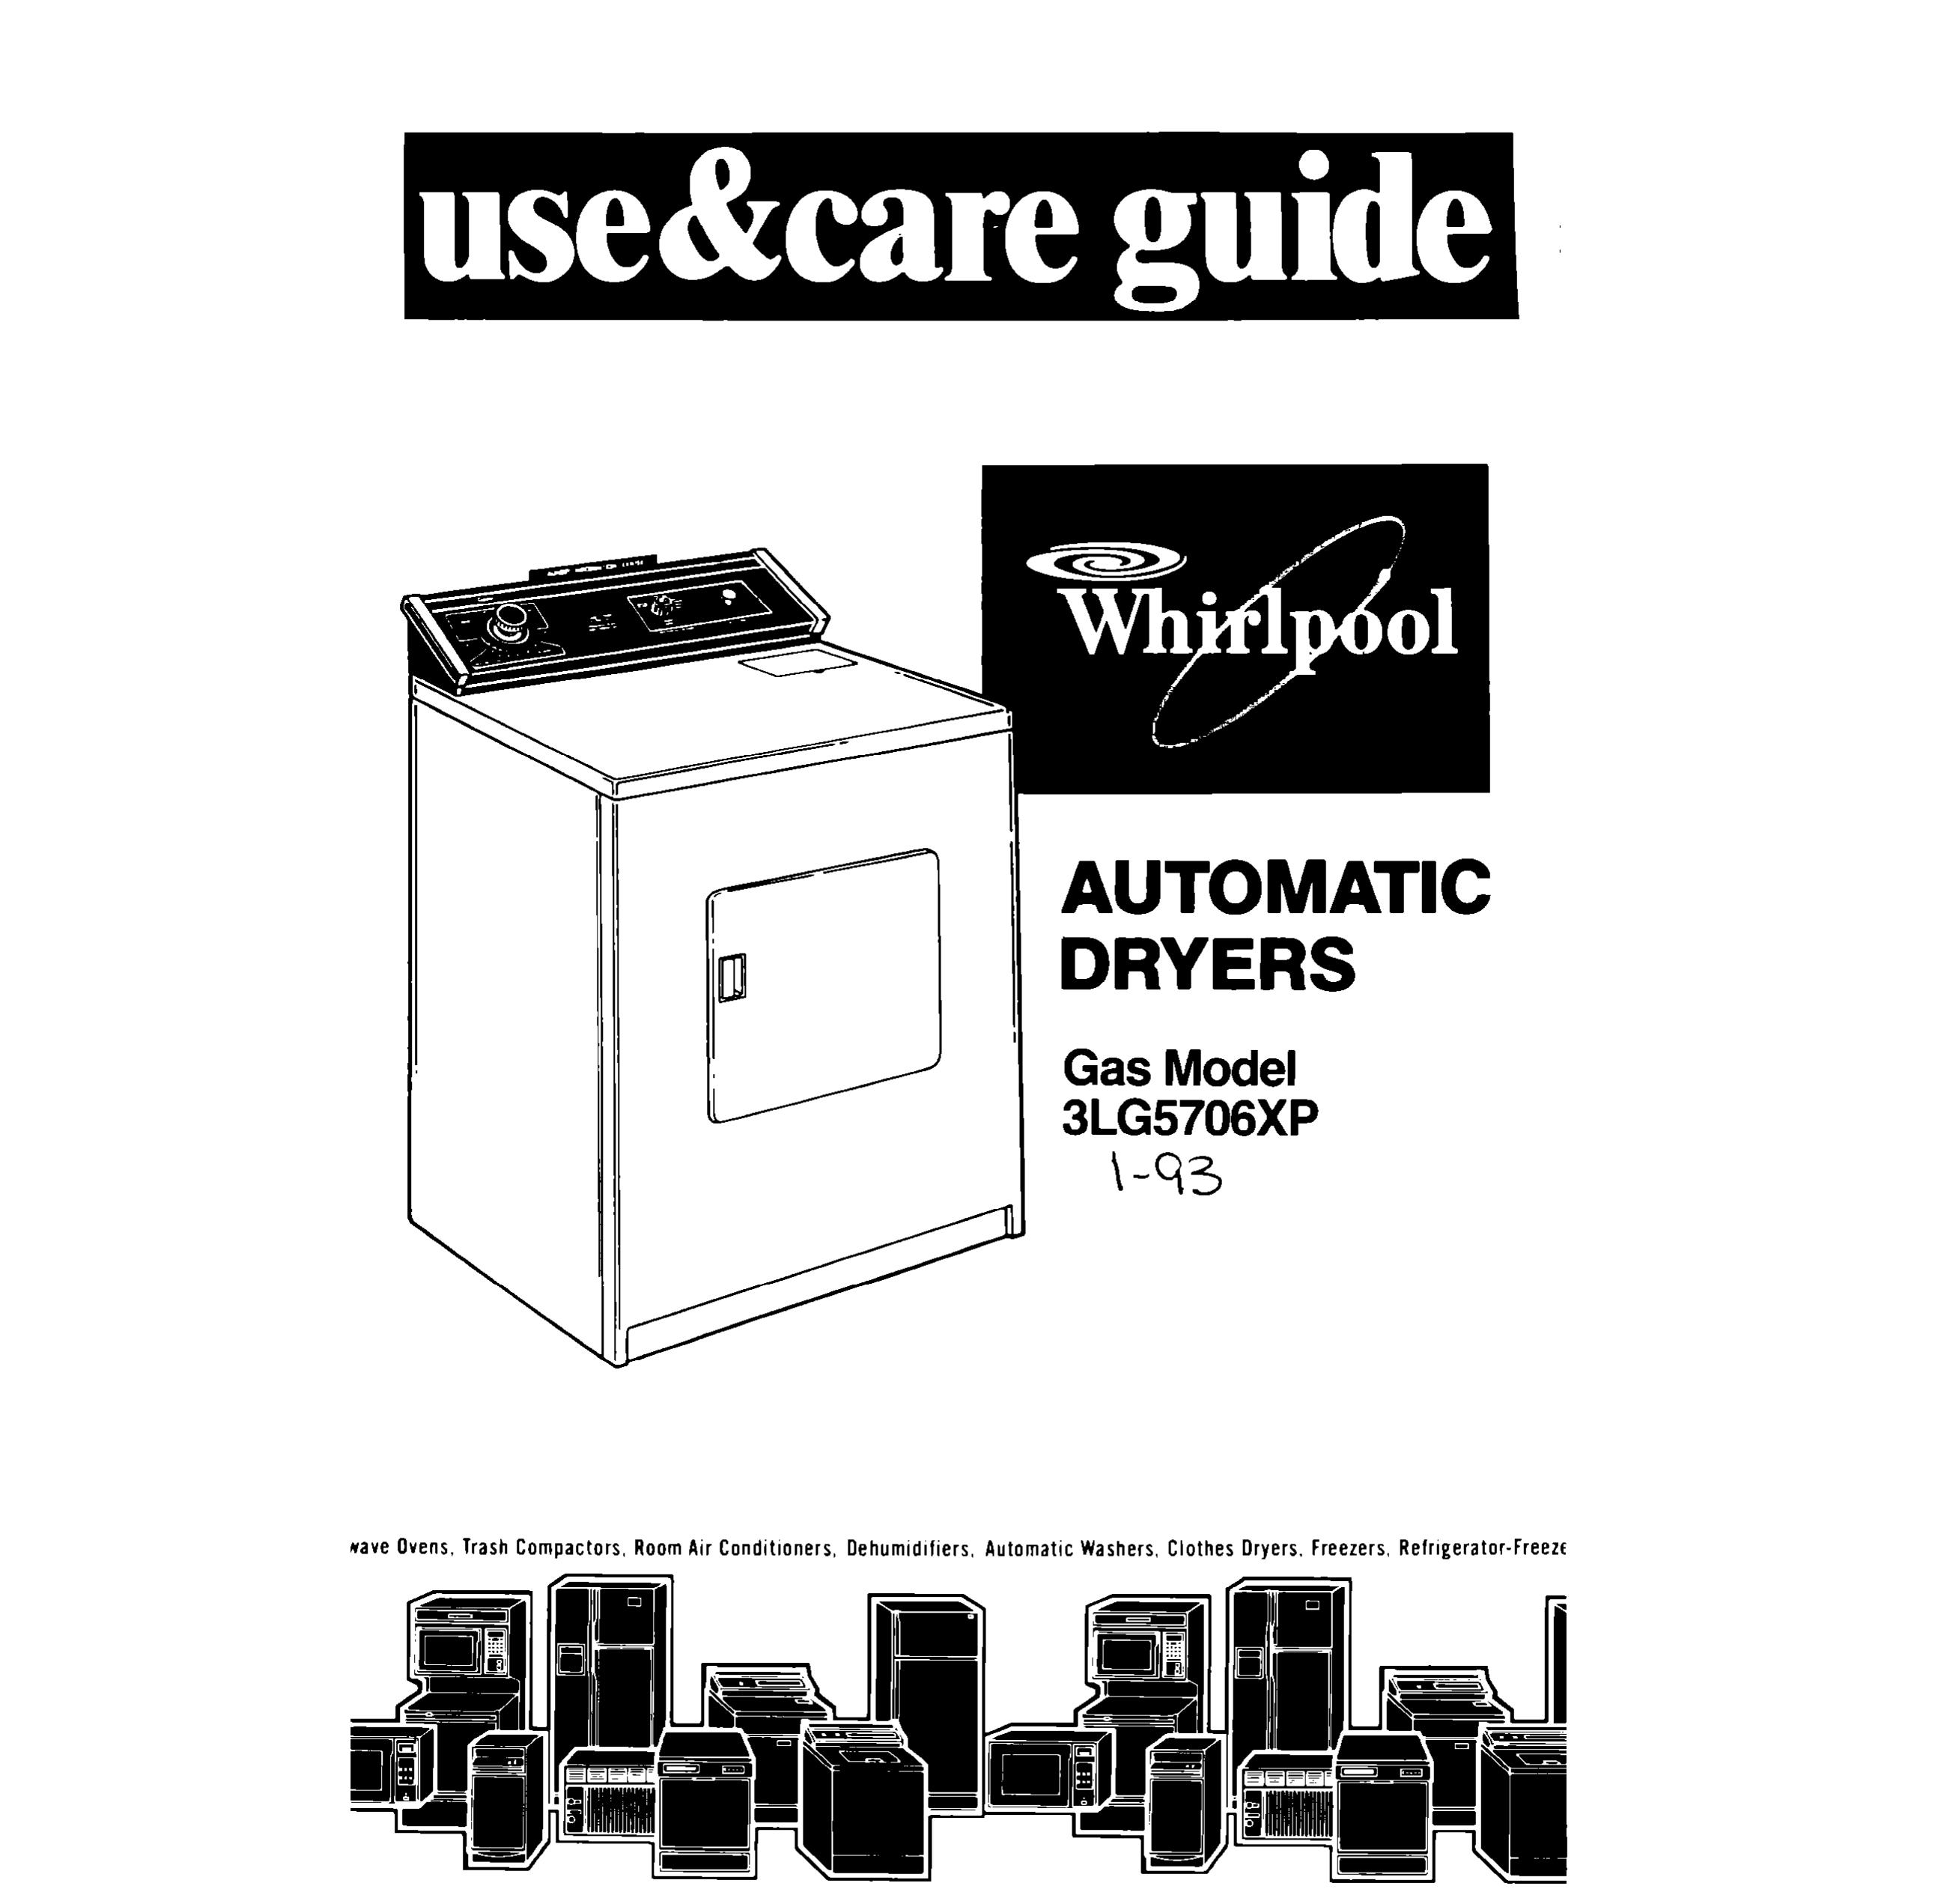 Whirlpool 3LG5706XP Clothes Dryer User Manual